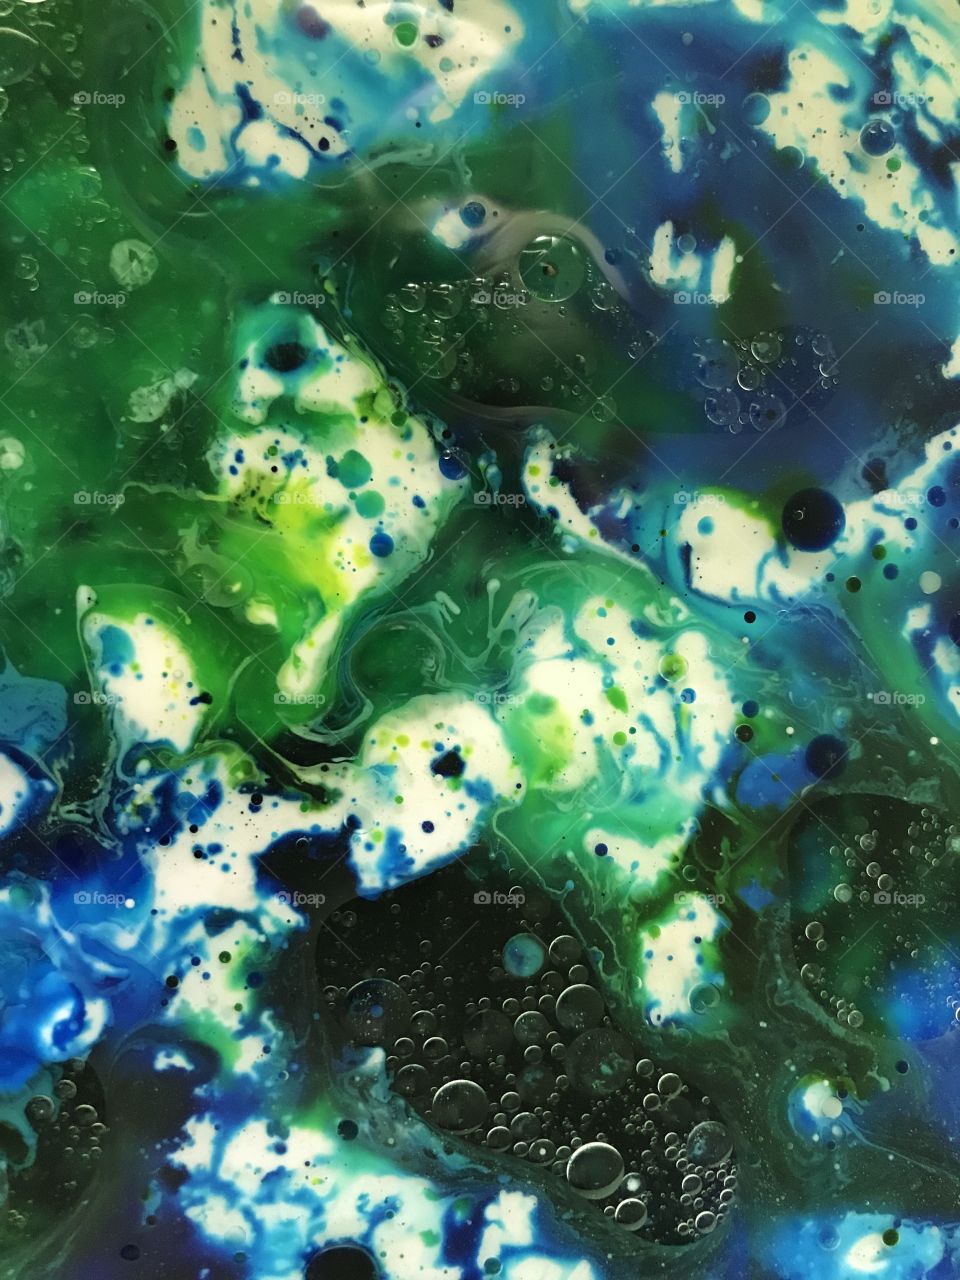 Creating soft, flowing, dynamic, three dimensional abstracts today. This one was made with unmixed layers of glue, oil,water then drops of food dye & dish soap added made this interesting 3d effect.